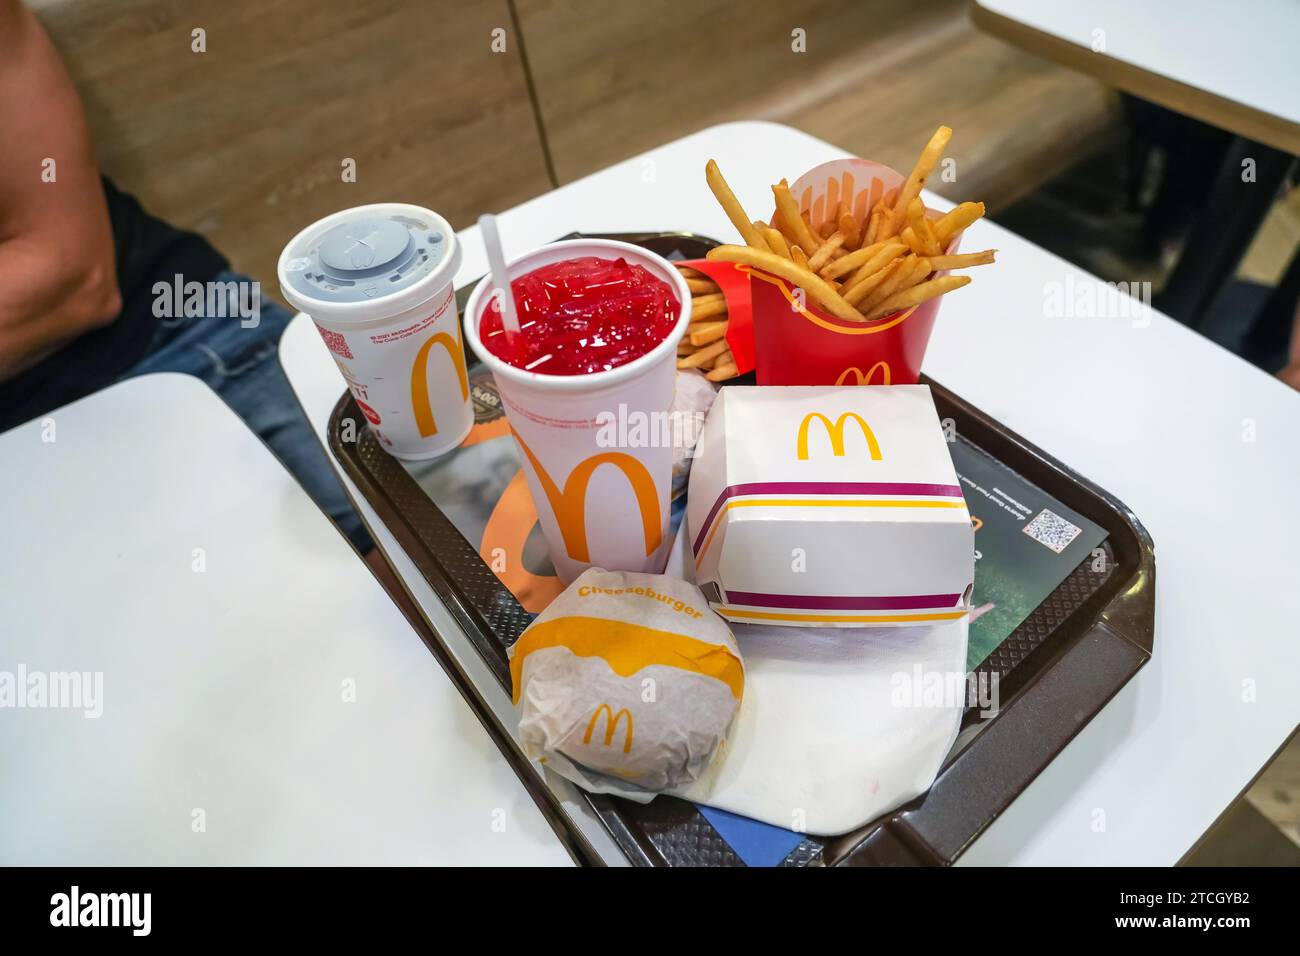 McDonald's is an American hamburger and fast food restaurant chain. The McDonald's logo has branches around the world. Thailand, Bangkok 04 december 2 Stock Photo